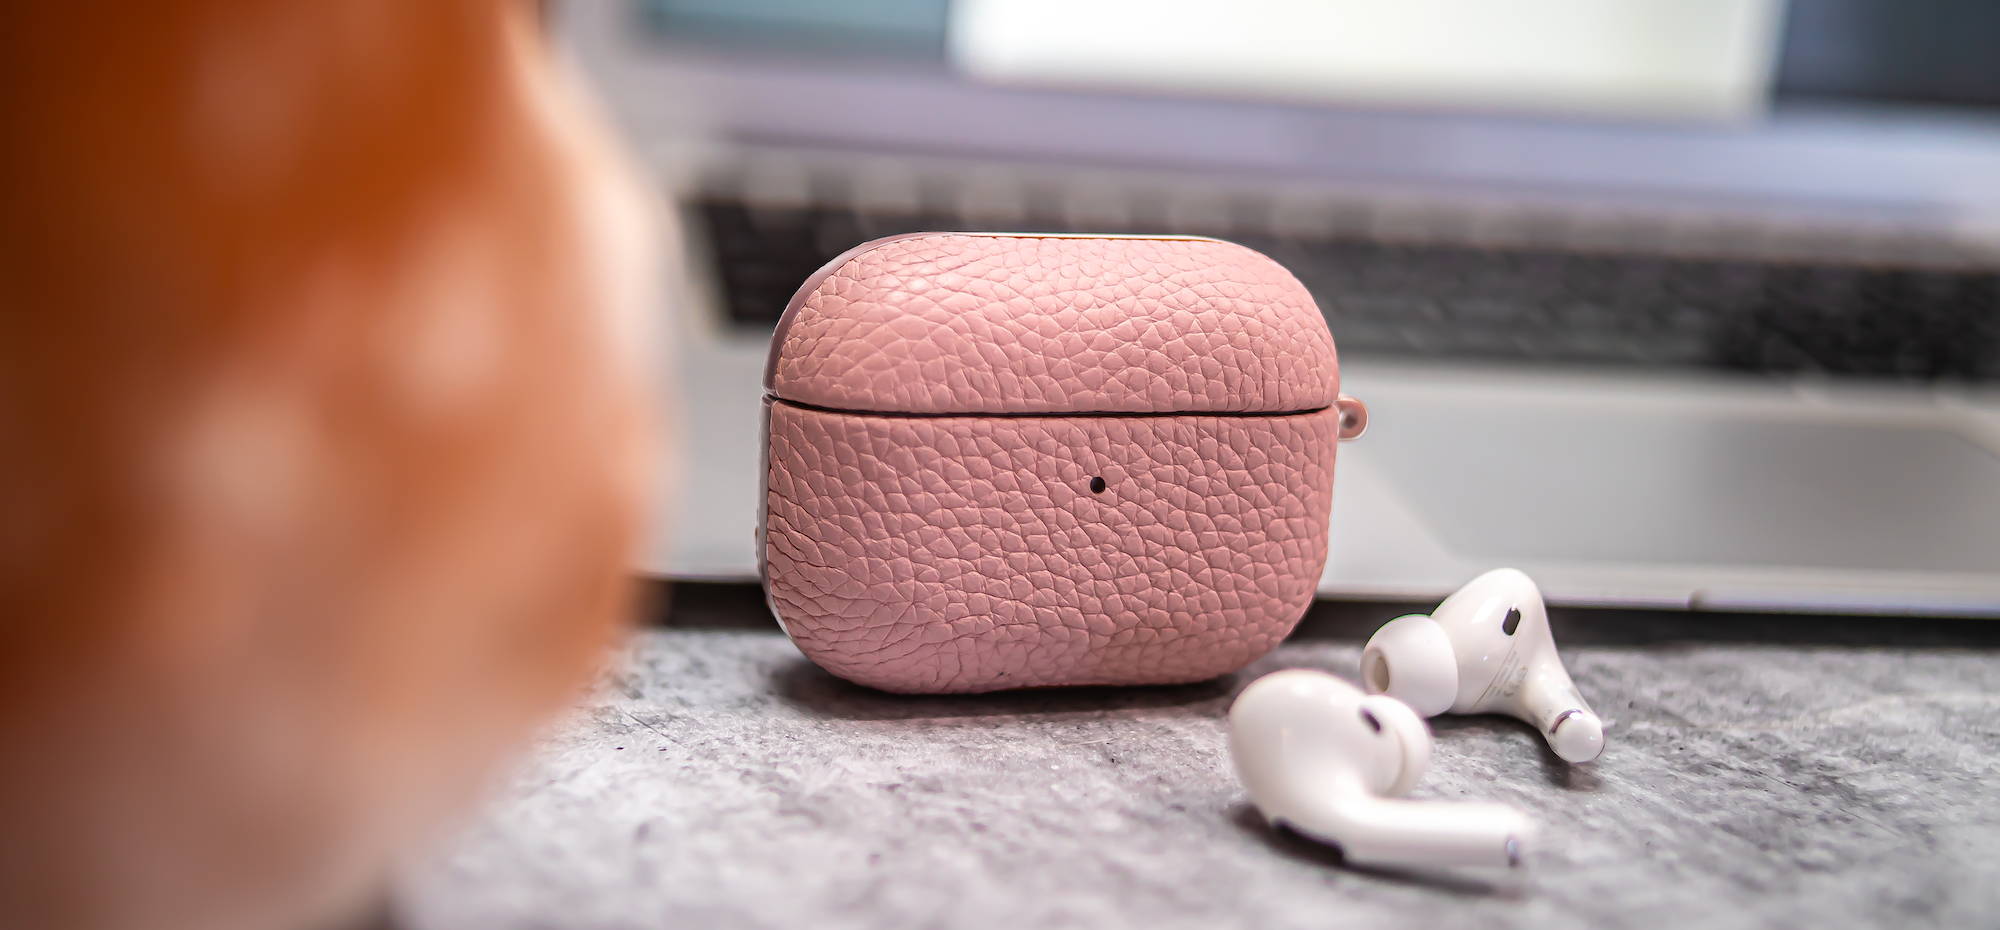 Pink genuine leather airpods pro case on granite table next to a macbook air laptop